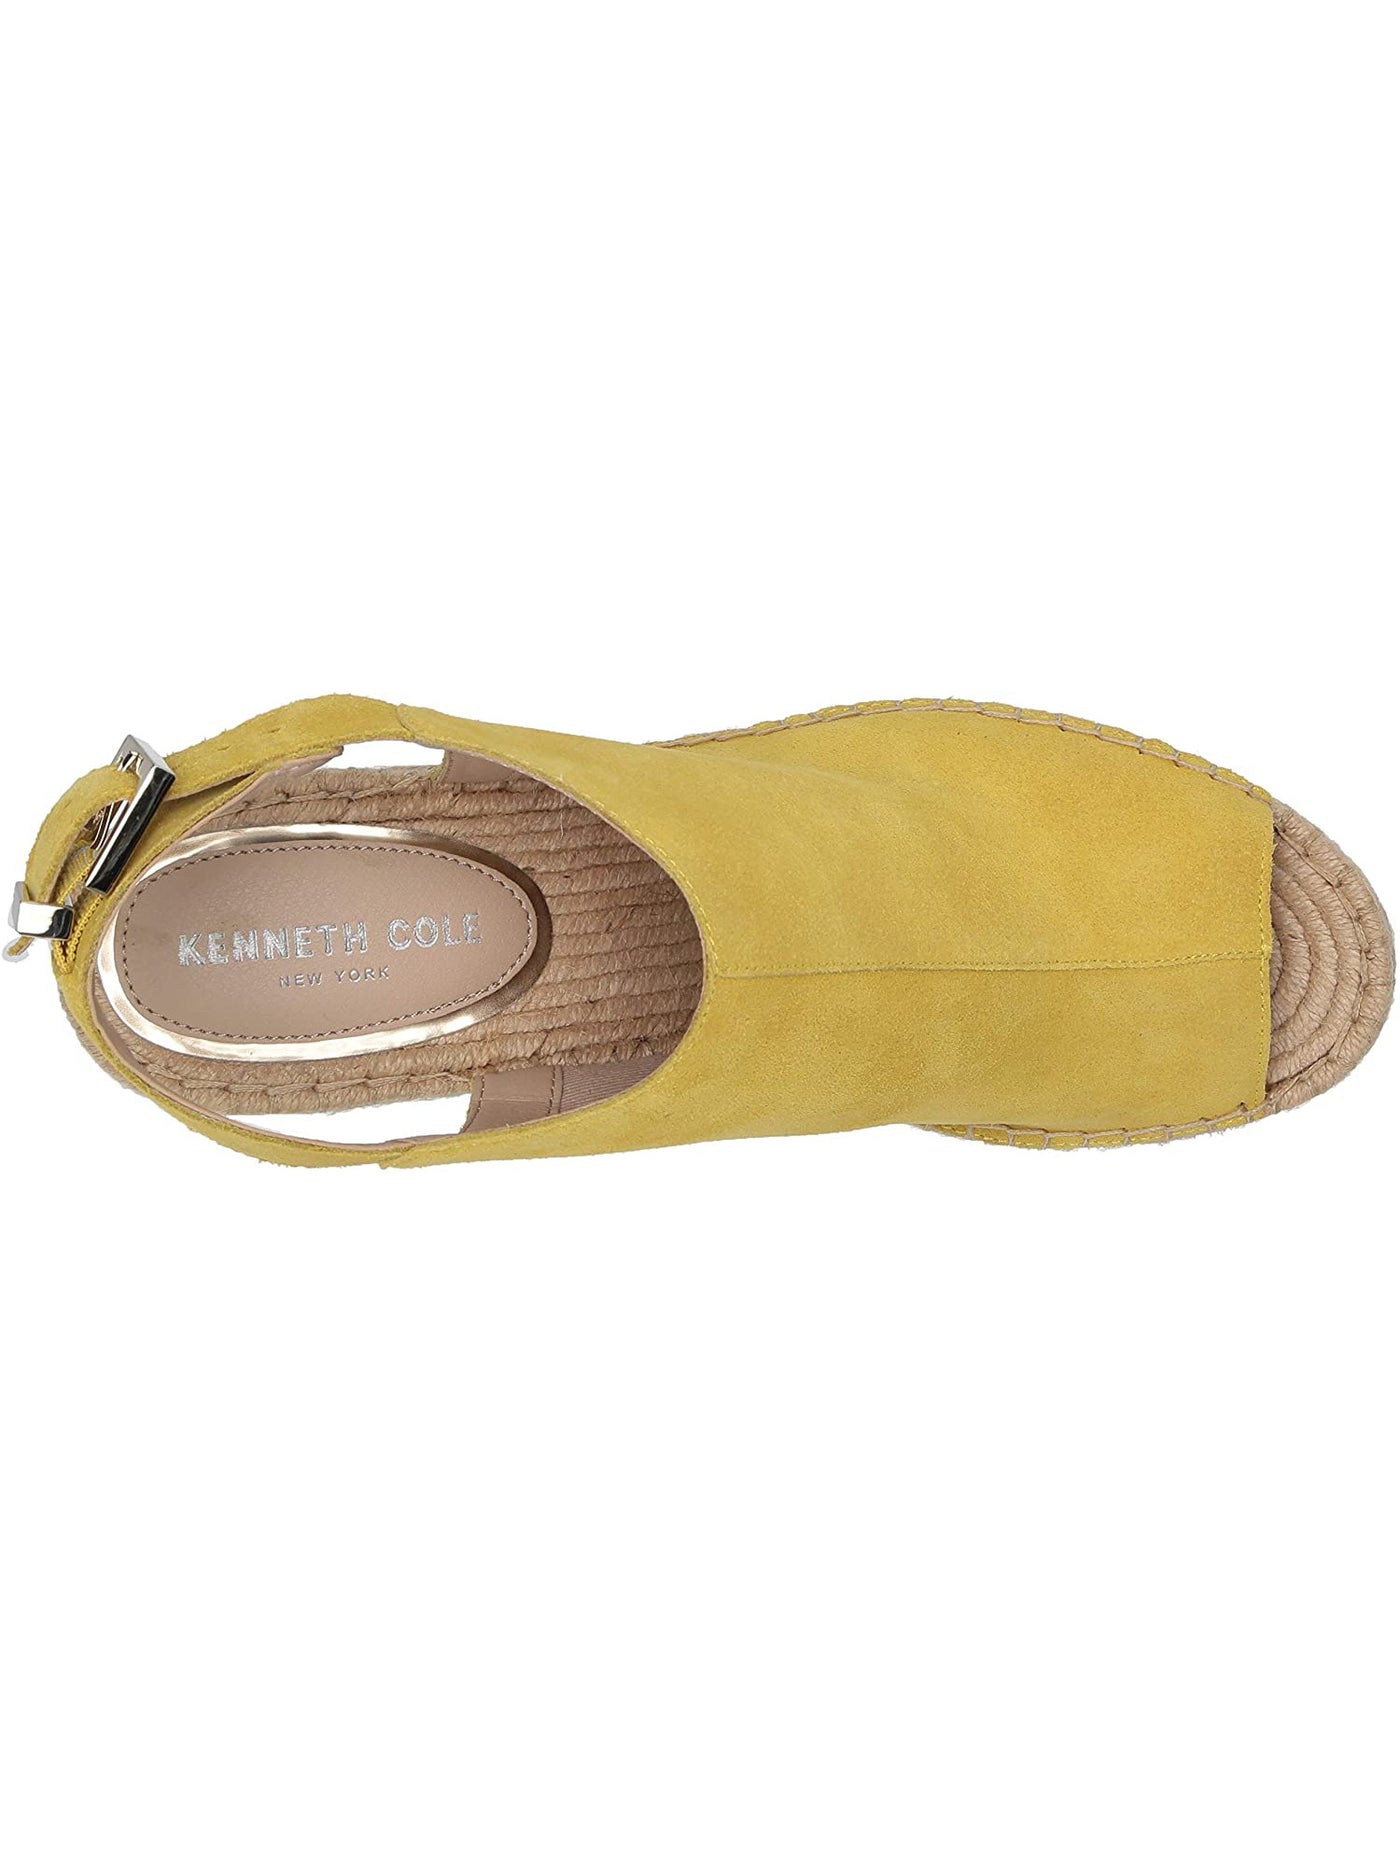 KENNETH COLE NEW YORK Womens Yellow Slingback 1" Platform Woven Jute Padded Adjustable Olivia Round Toe Wedge Buckle Leather Espadrille Shoes 7 M